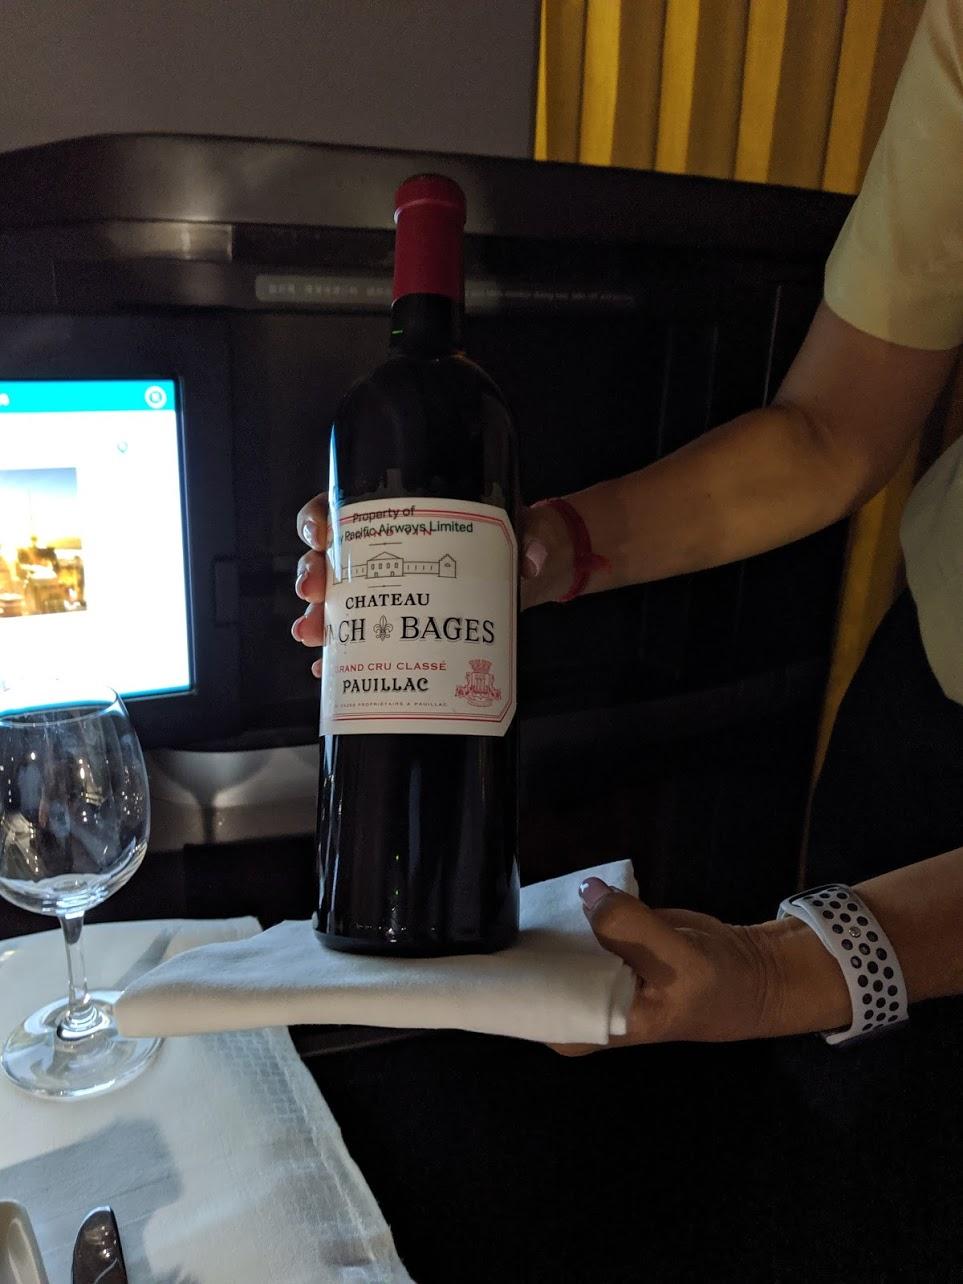 Cathay Pacific First Class Lynch Bages